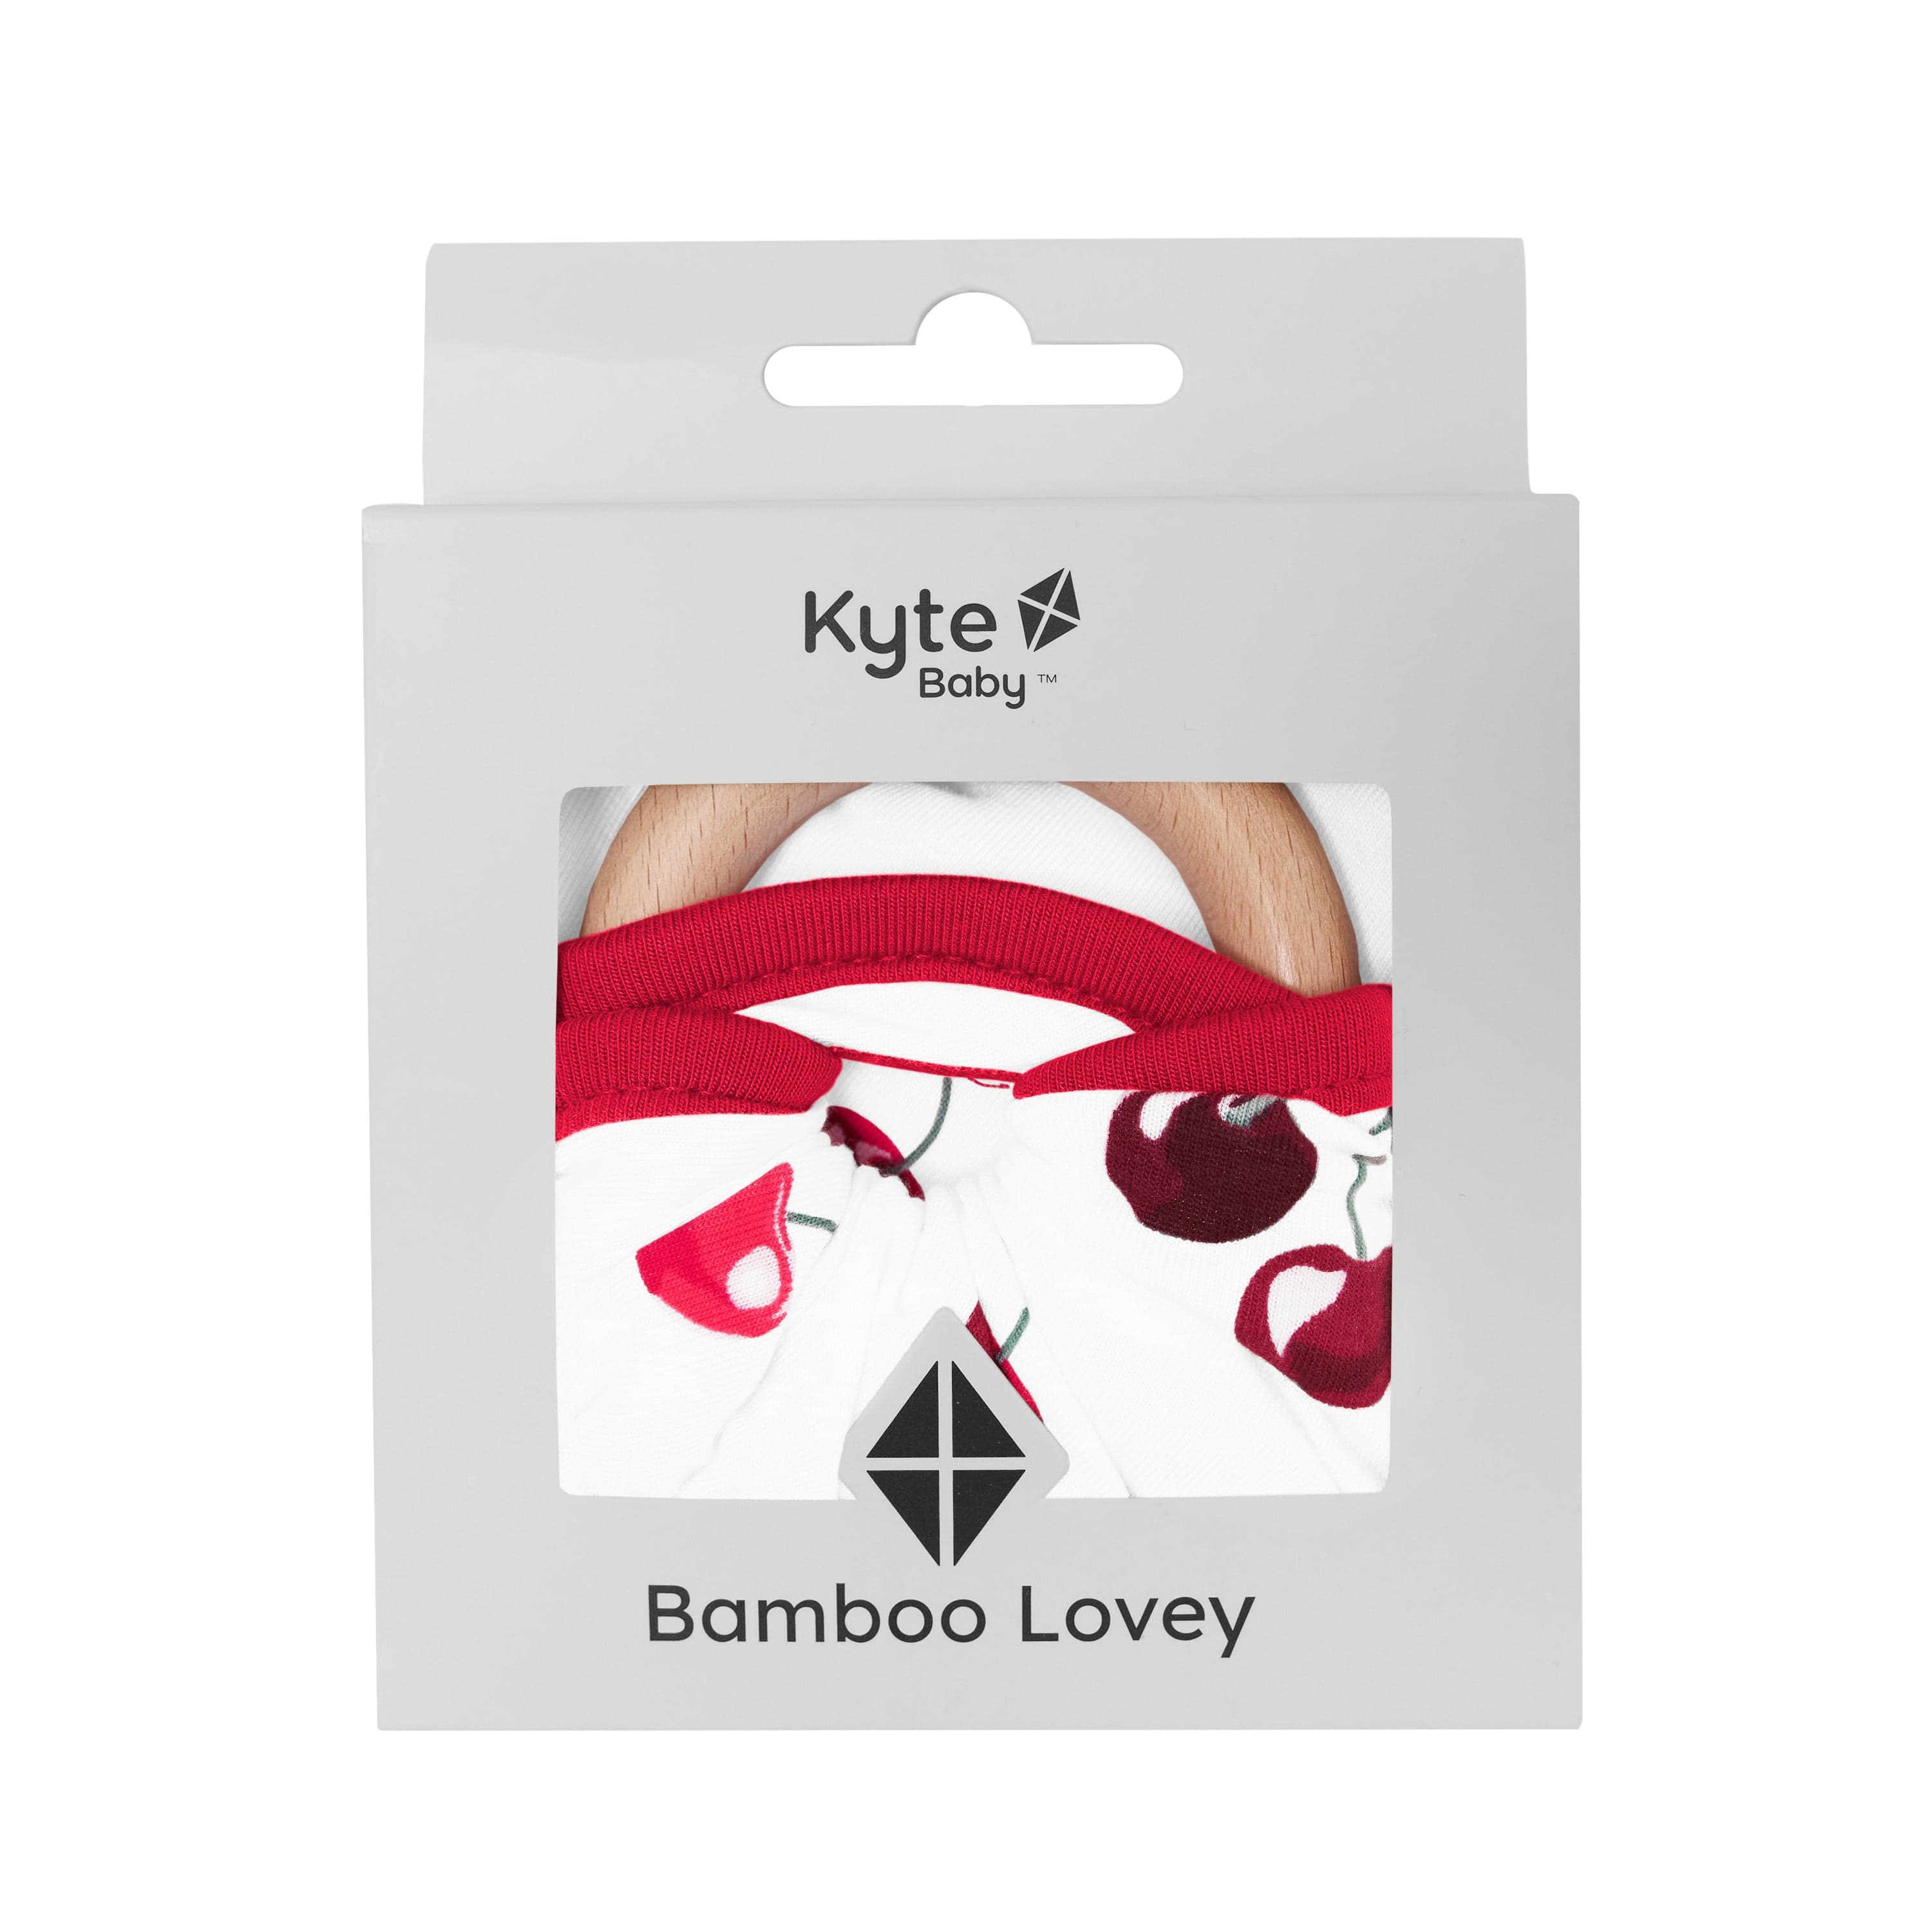 Kyte Baby Lovey Cherry / Infant Lovey in Cherry with Removable Teething Ring